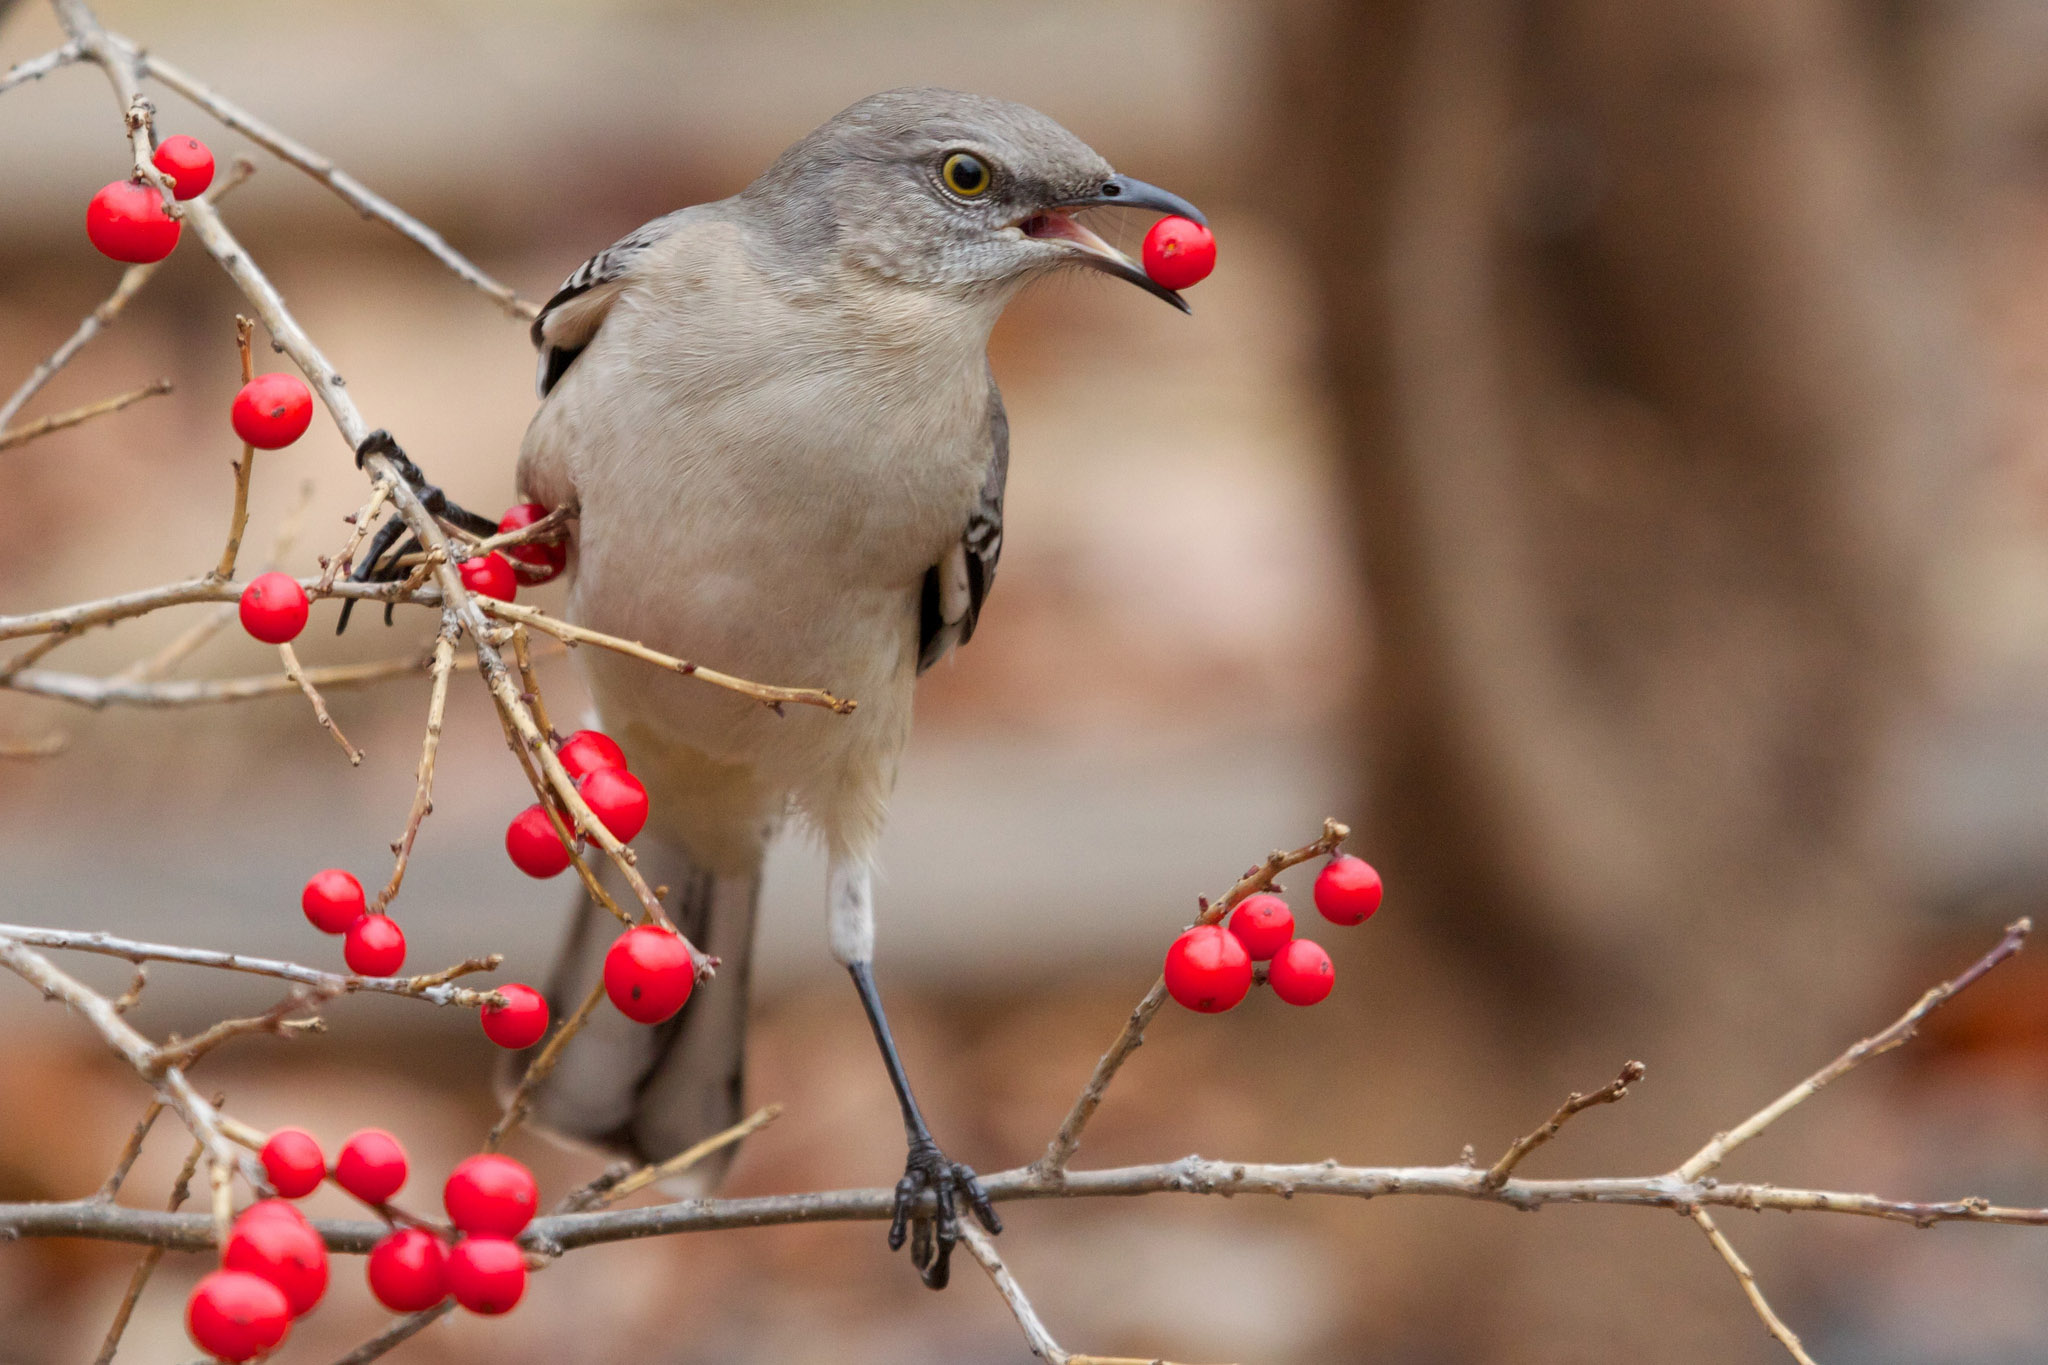 They're still a rare sight, but it's not totally atypical for northern mockingbirds to hang around Pennsylvania in the winter. Photo: Matt MacGillivray via Flickr